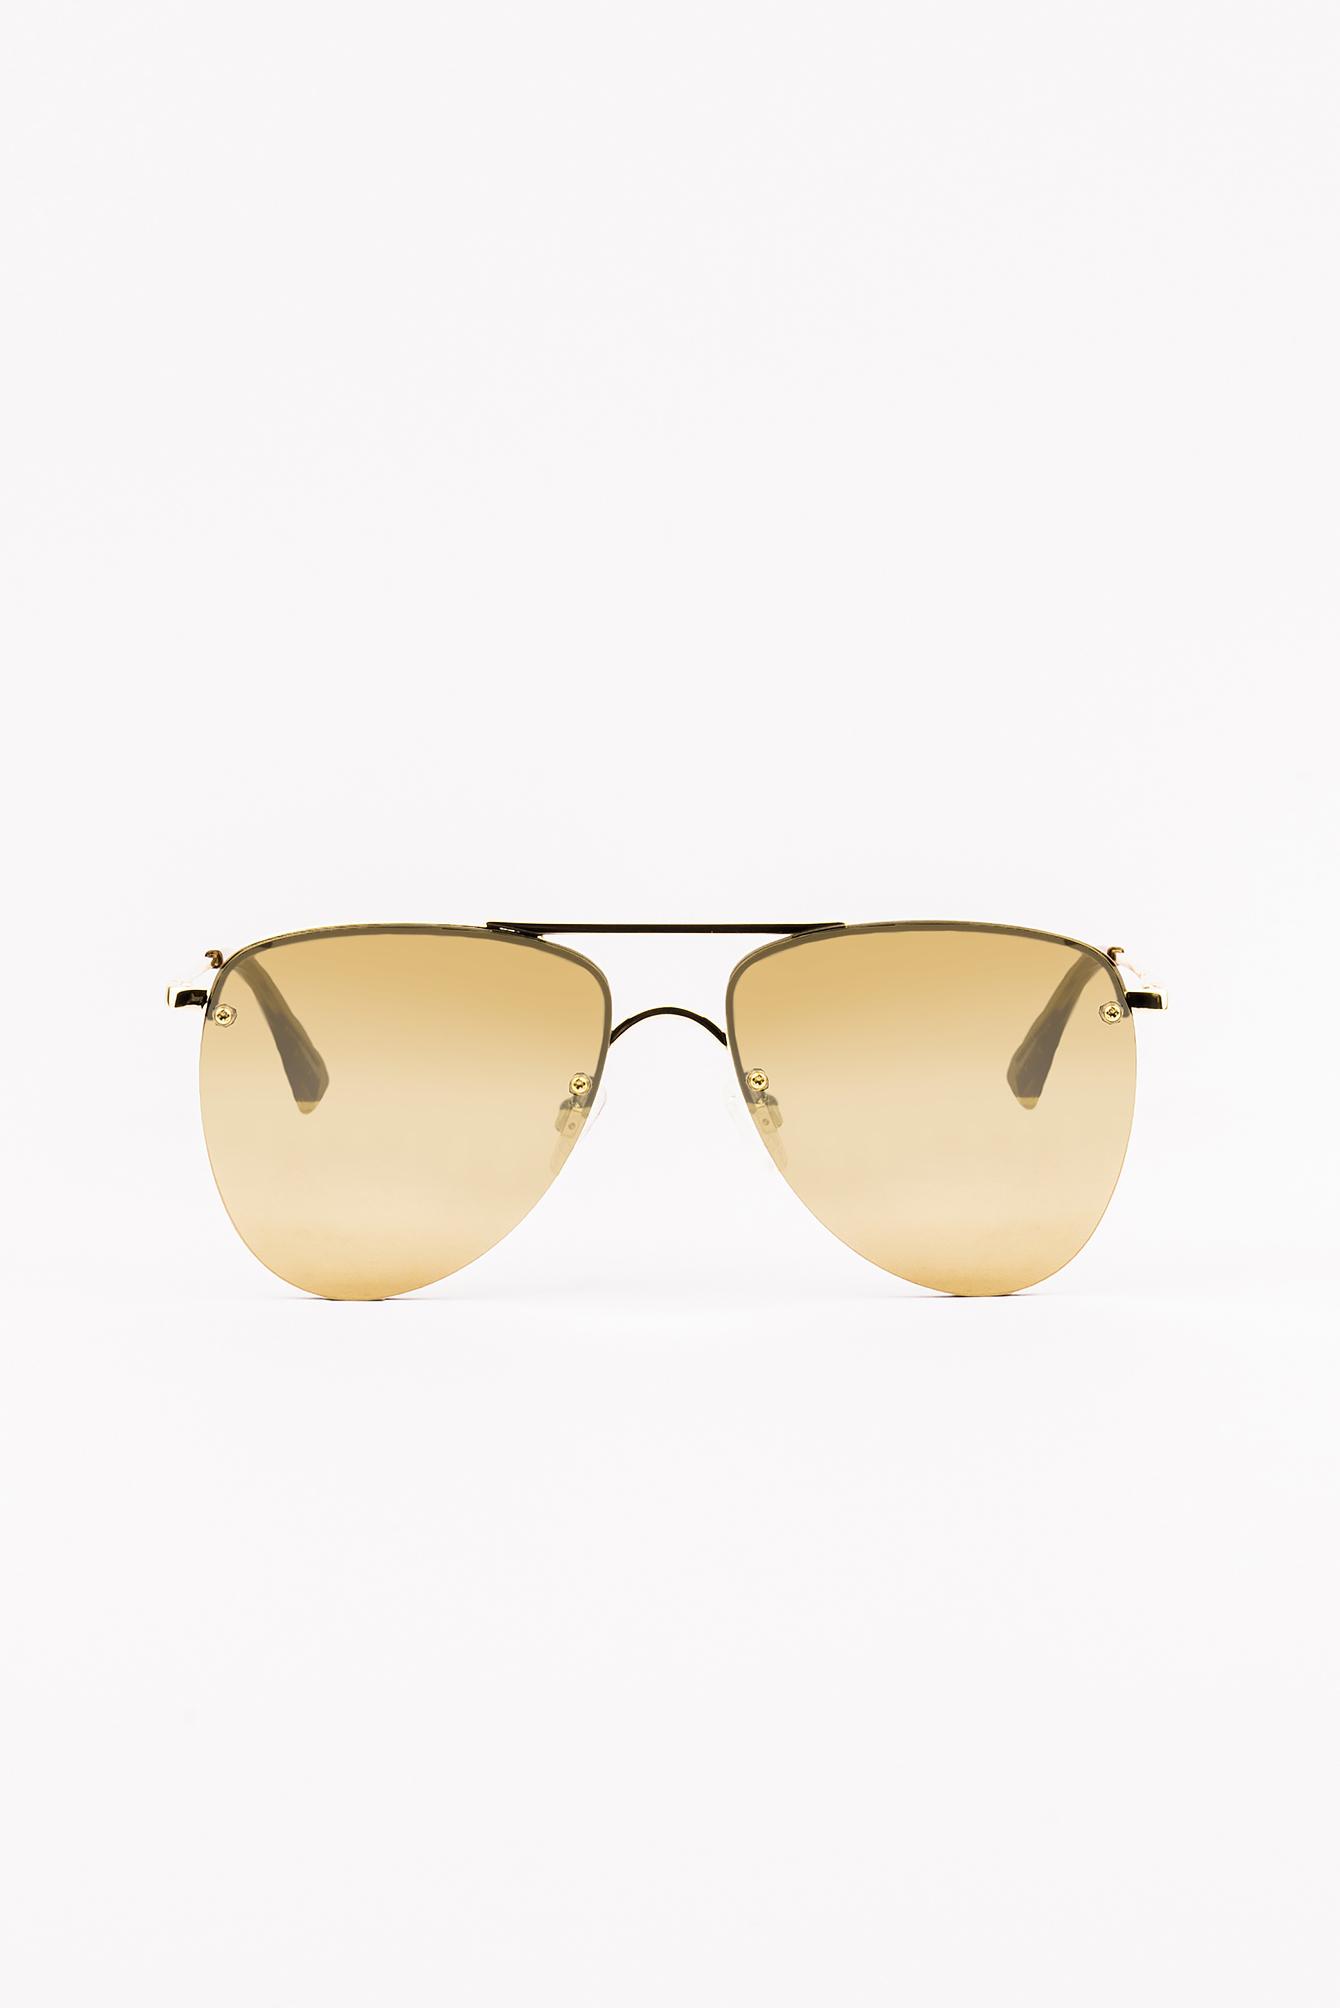 Le Specs The Prince Gold/tan | Lyst